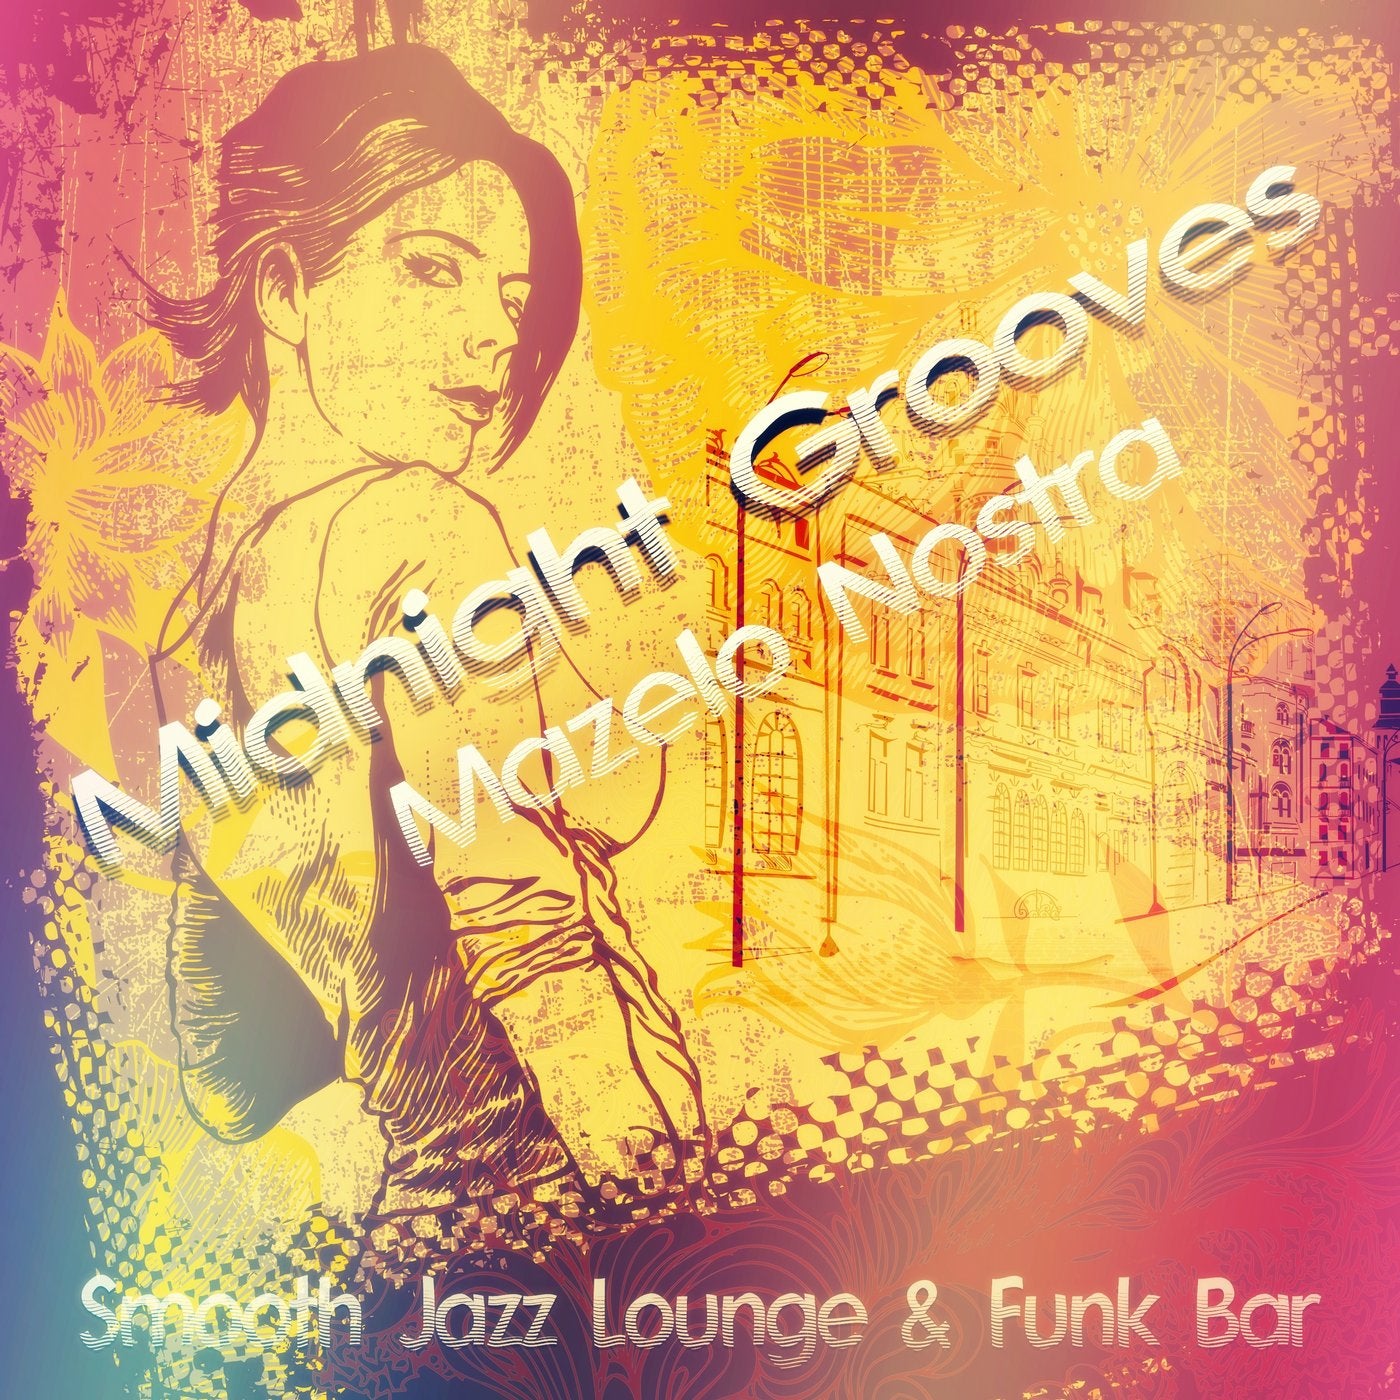 Midnight Grooves (Smooth Jazz Lounge & Funk Bar)